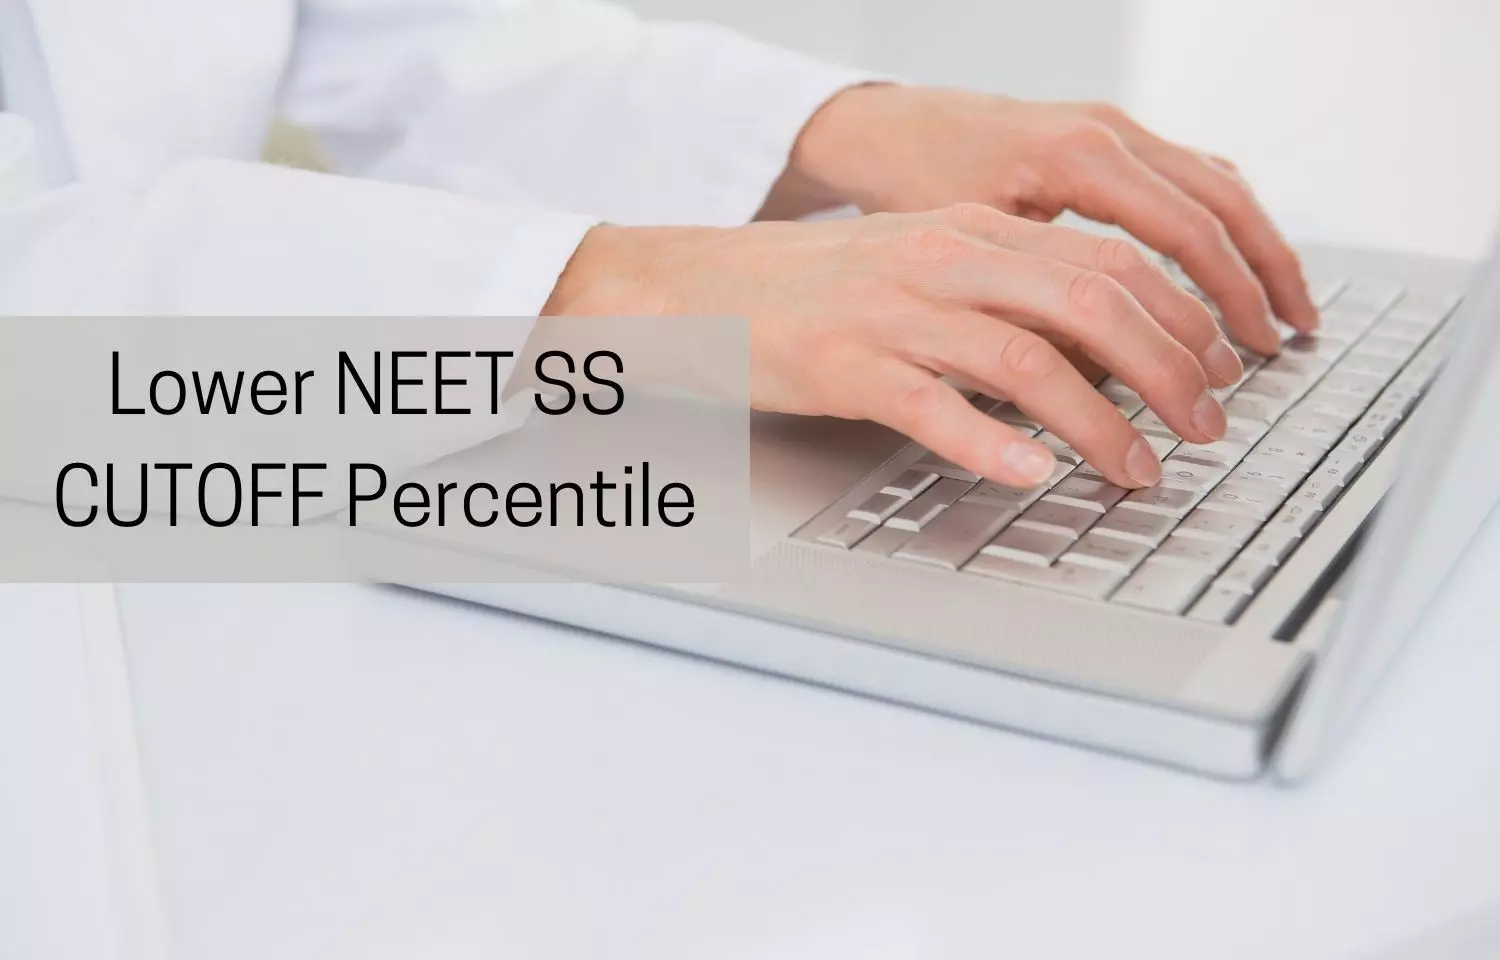 Around 889 seats Vacant: Doctors urge Health Minister to lower NEET SS cutoff percentile